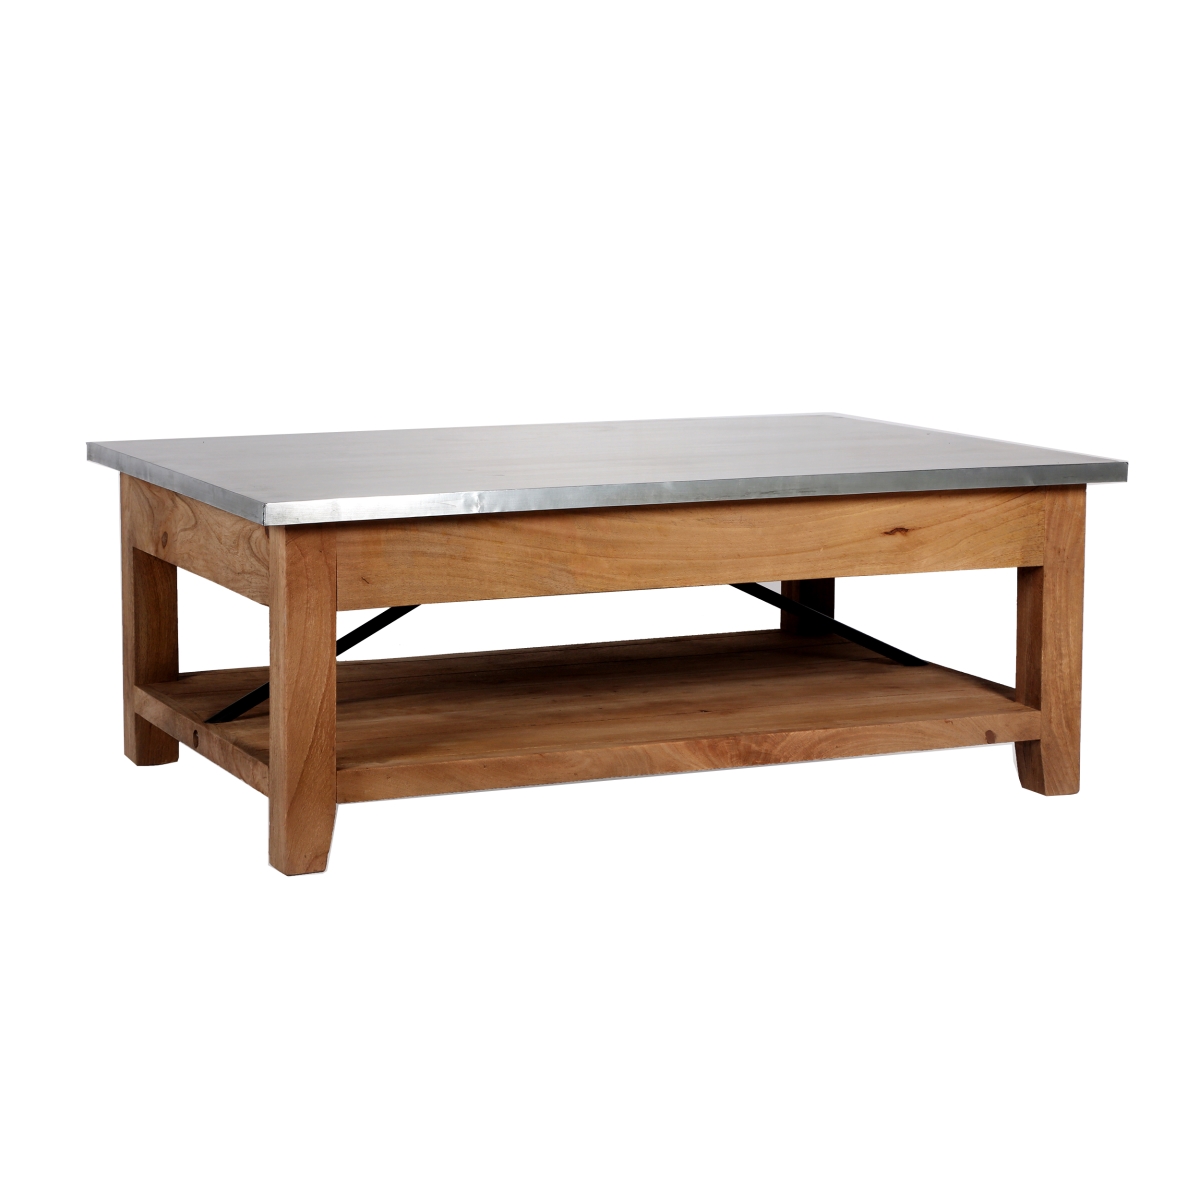 Picture of Alaterre AWMW1271Z 48 in. Millwork Wood & Zinc Metal Coffee Table with Shelf